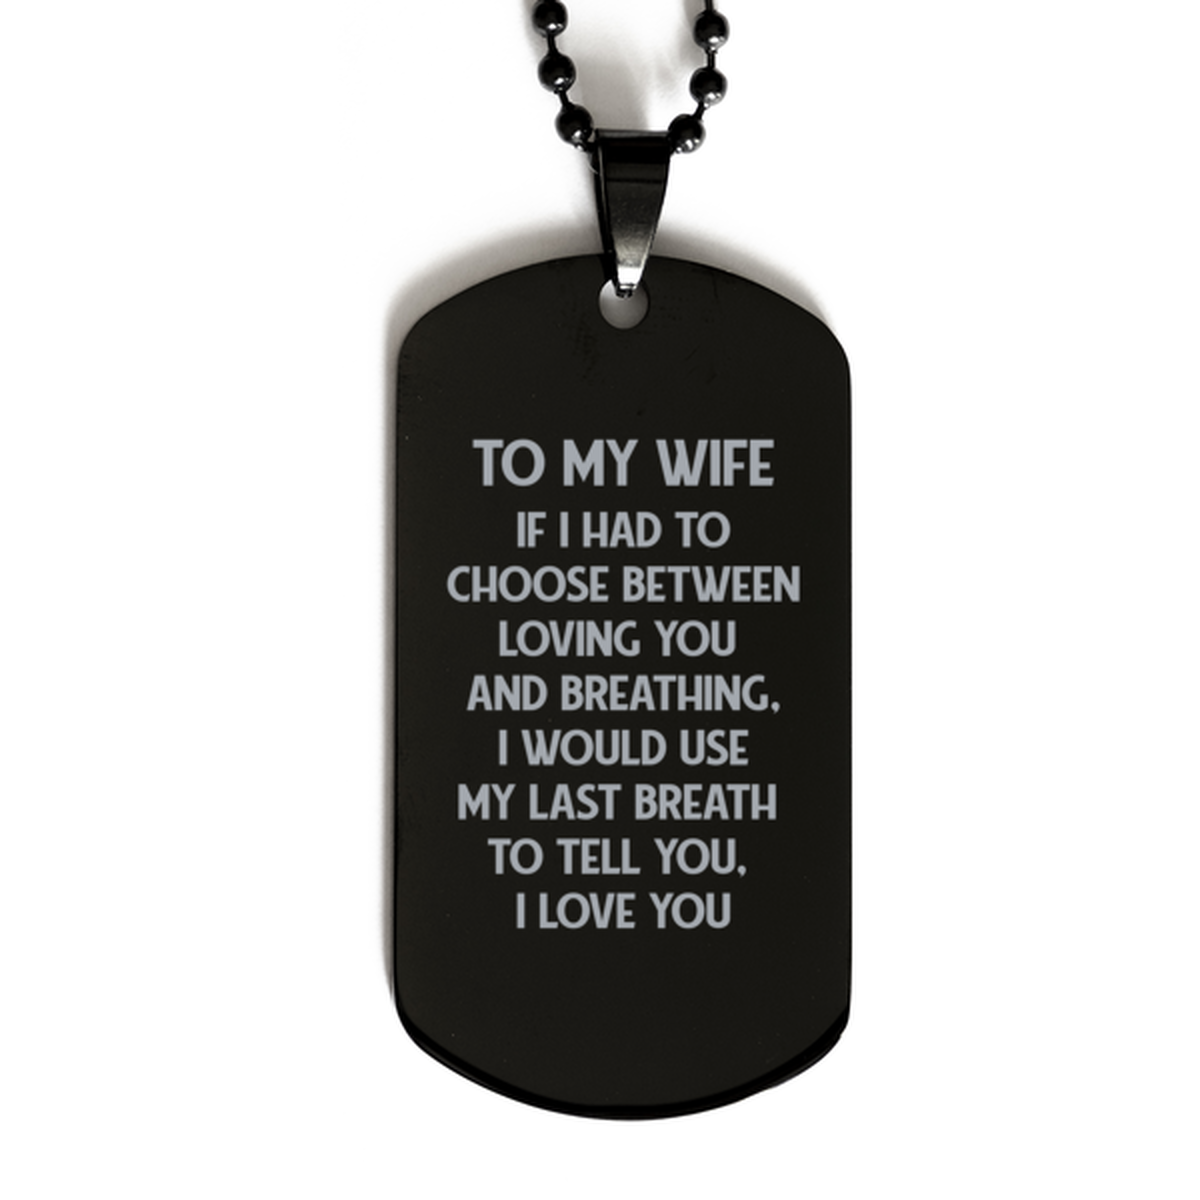 To My Wife Black Dog Tag, Loving You, Birthday Gifts For Wife From Husband, Valentines Gifts For Women